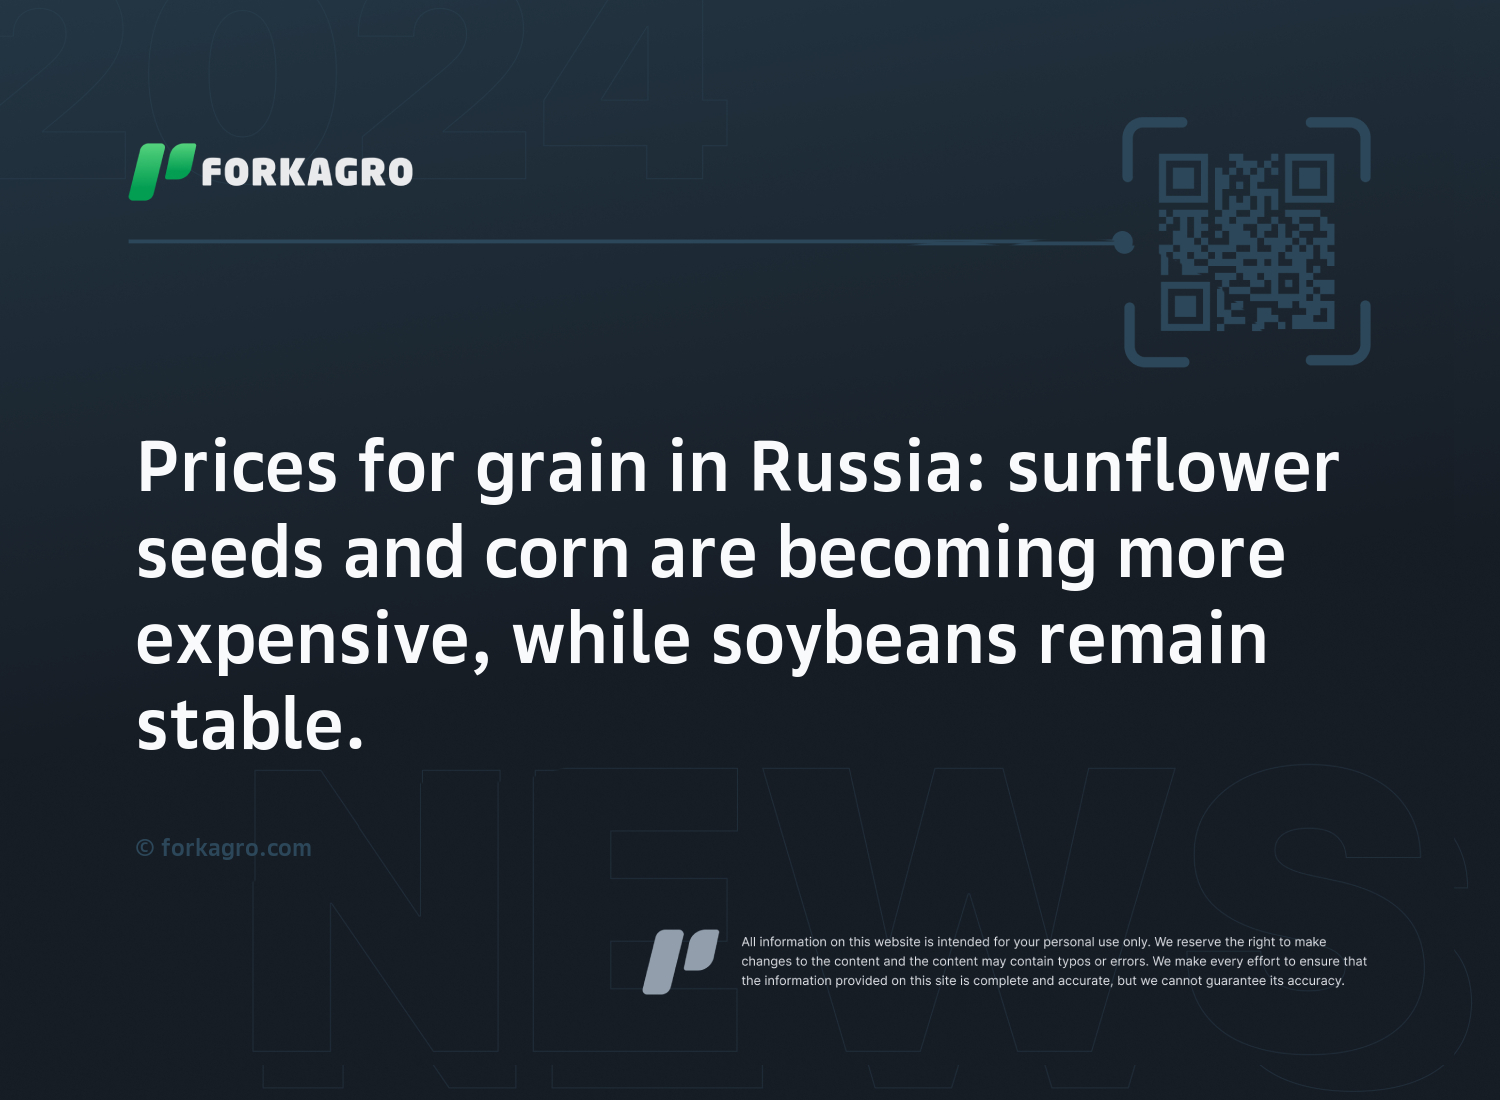 Prices for grain in Russia: sunflower seeds and corn are becoming more expensive, while soybeans remain stable.